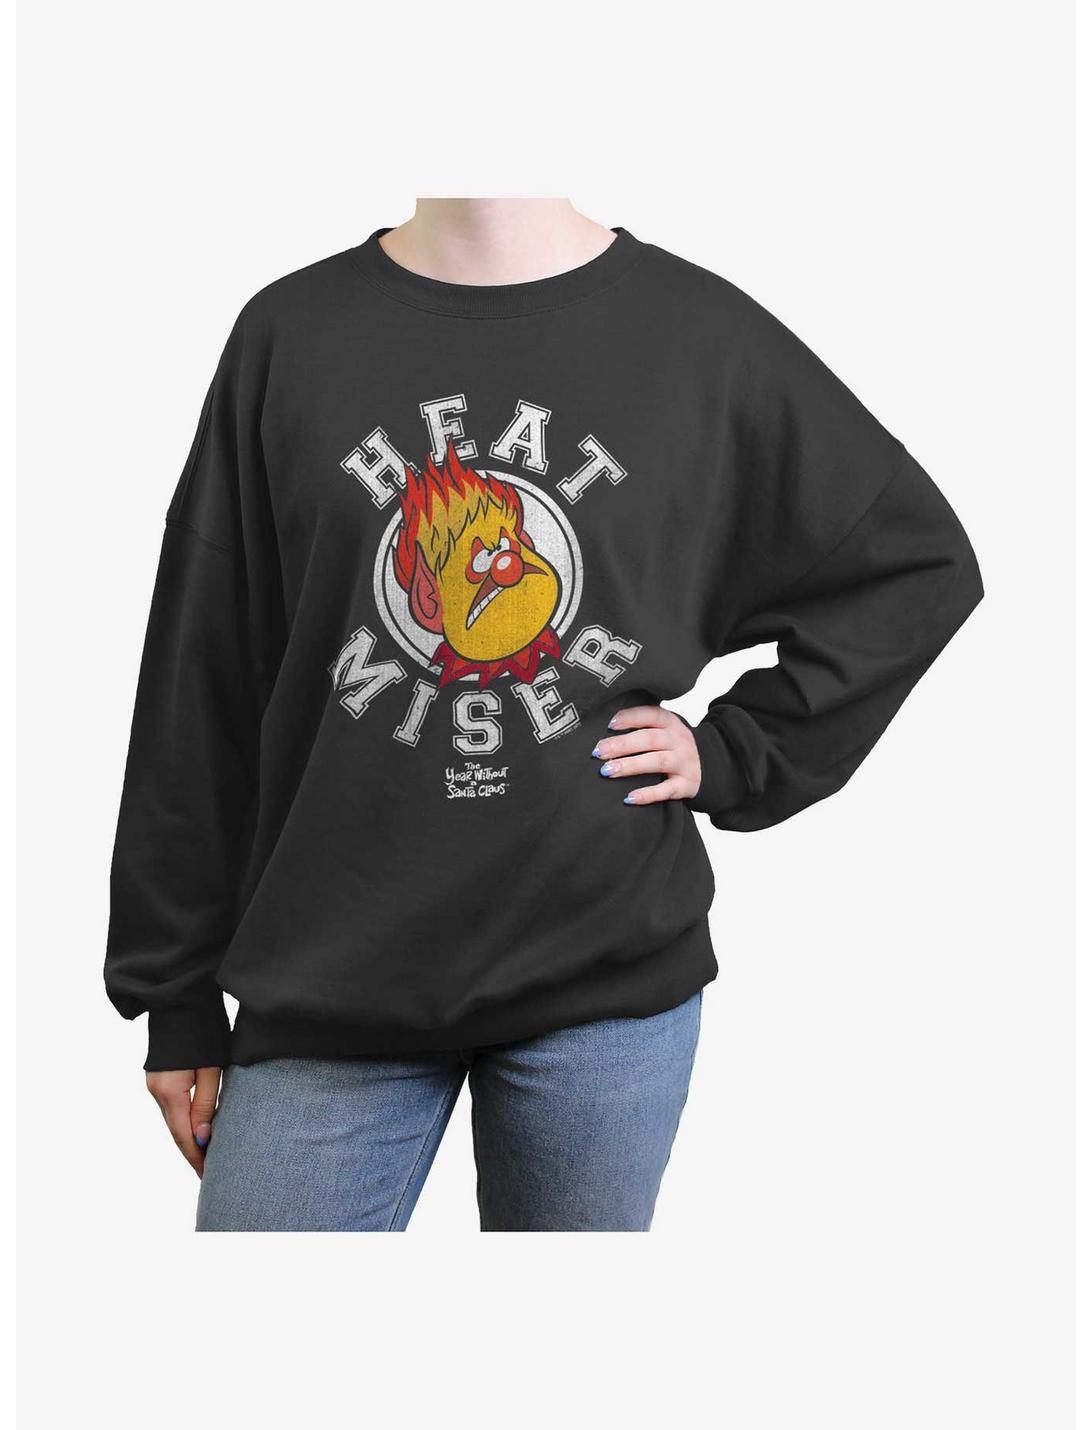 The Year Without a Santa Claus Heat Miser Collegiate Womens Oversized Sweatshirt, CHARCOAL, hi-res